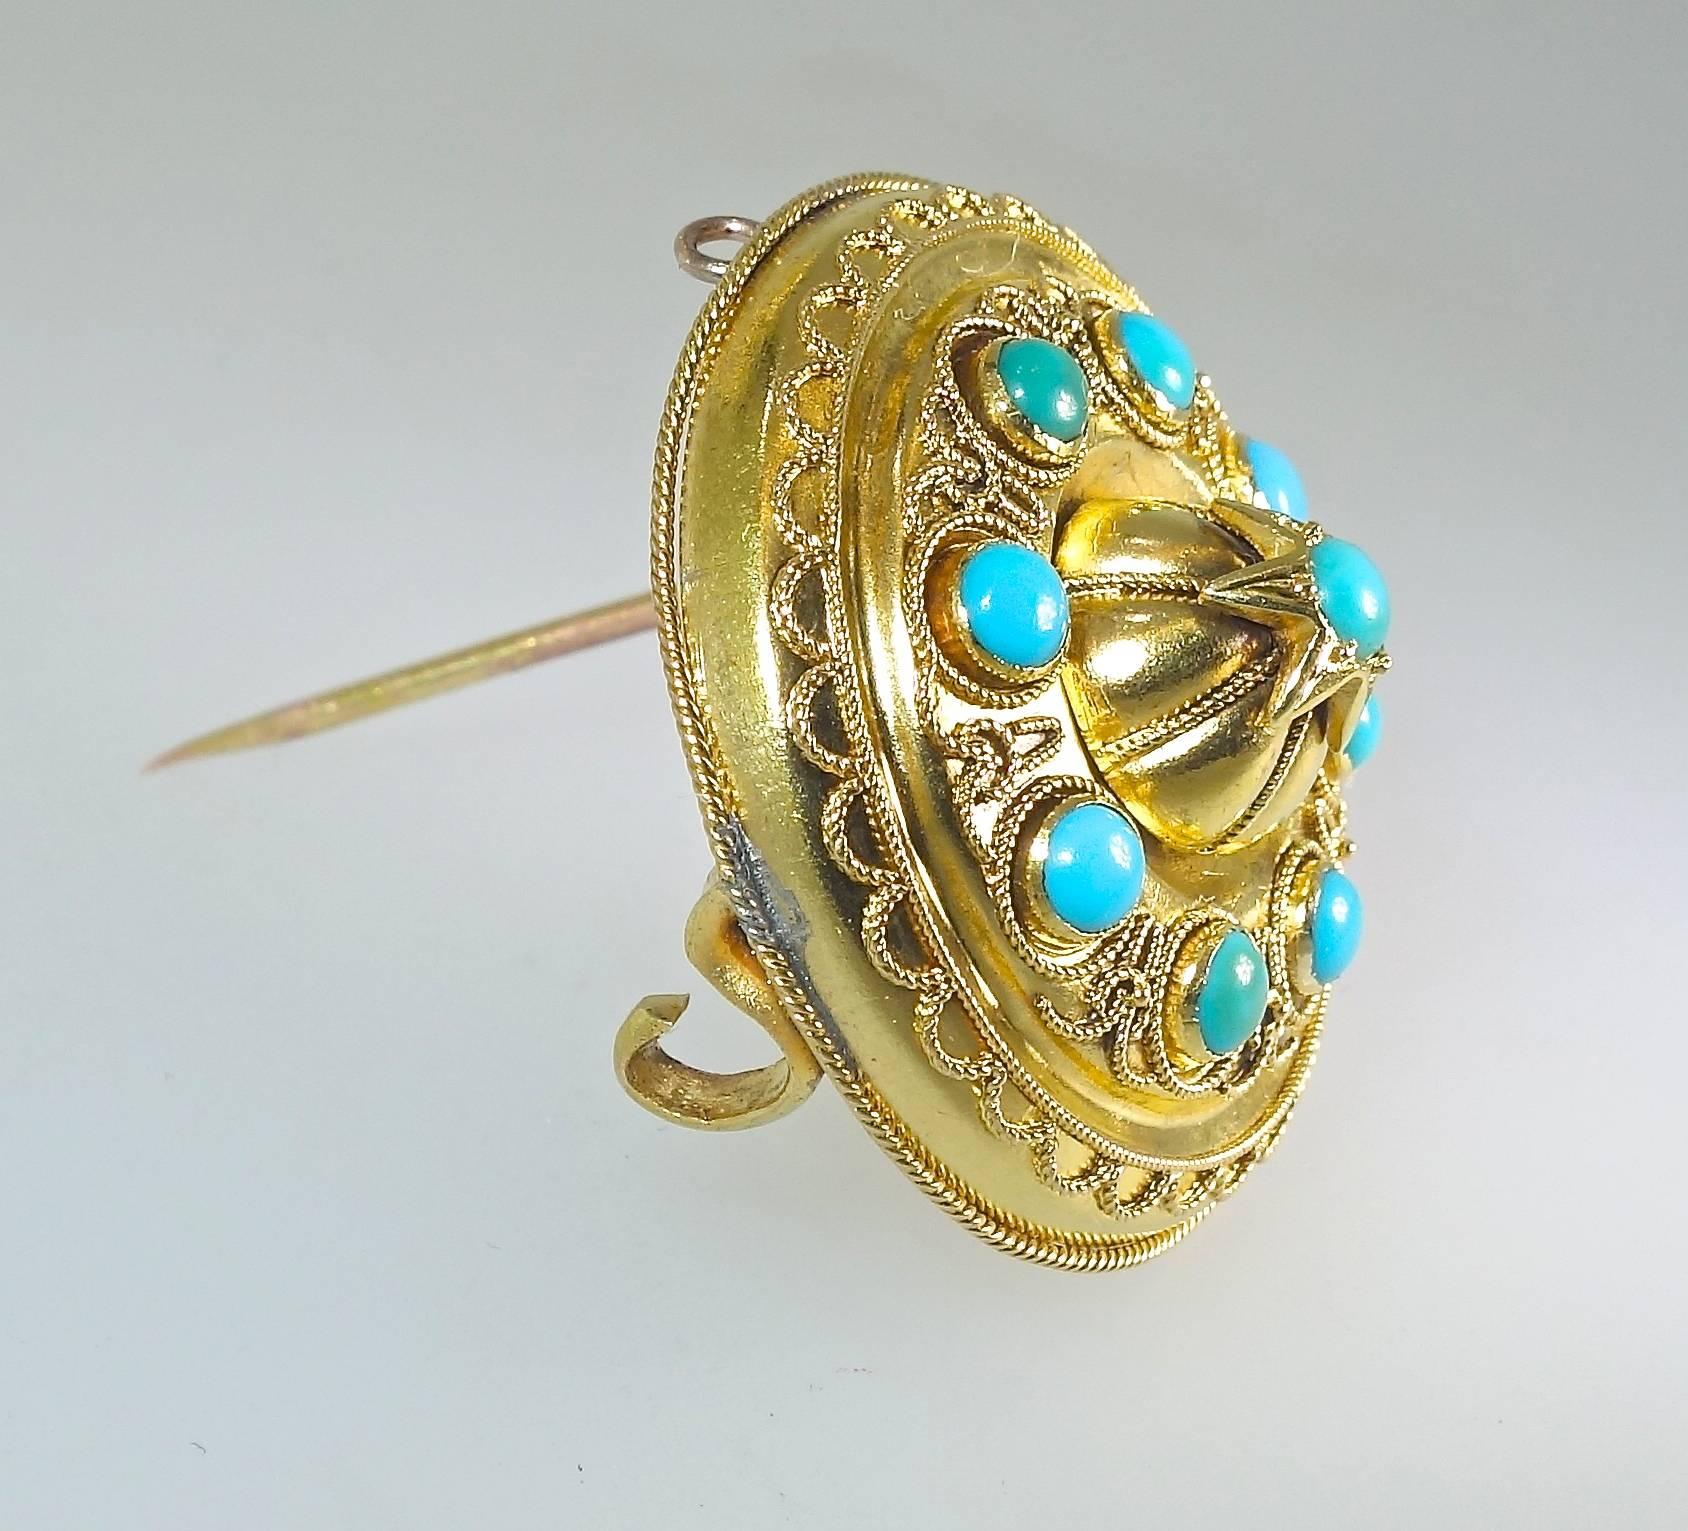 All original, this Victorian brooch has a hair receiver in the back, 9 natural turquoise are bezel set in fine Etruscan revival gold work.  The brooch is 1 1/8 inches in diameter.